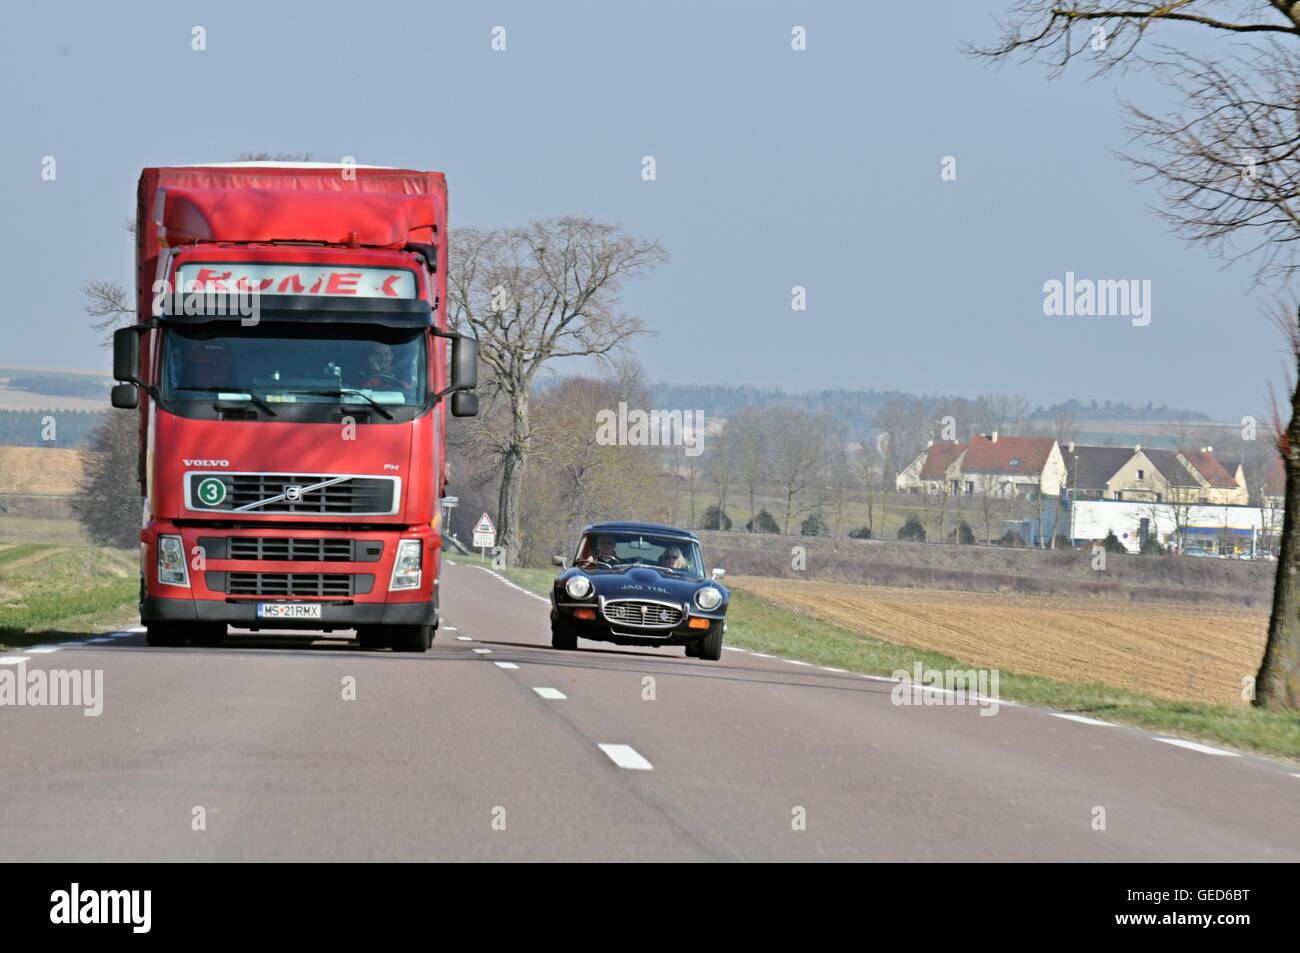 Jaguar E-type classic car overtaking a large red articulated lorry on a clear road in the French countryside in Winter Stock Photo